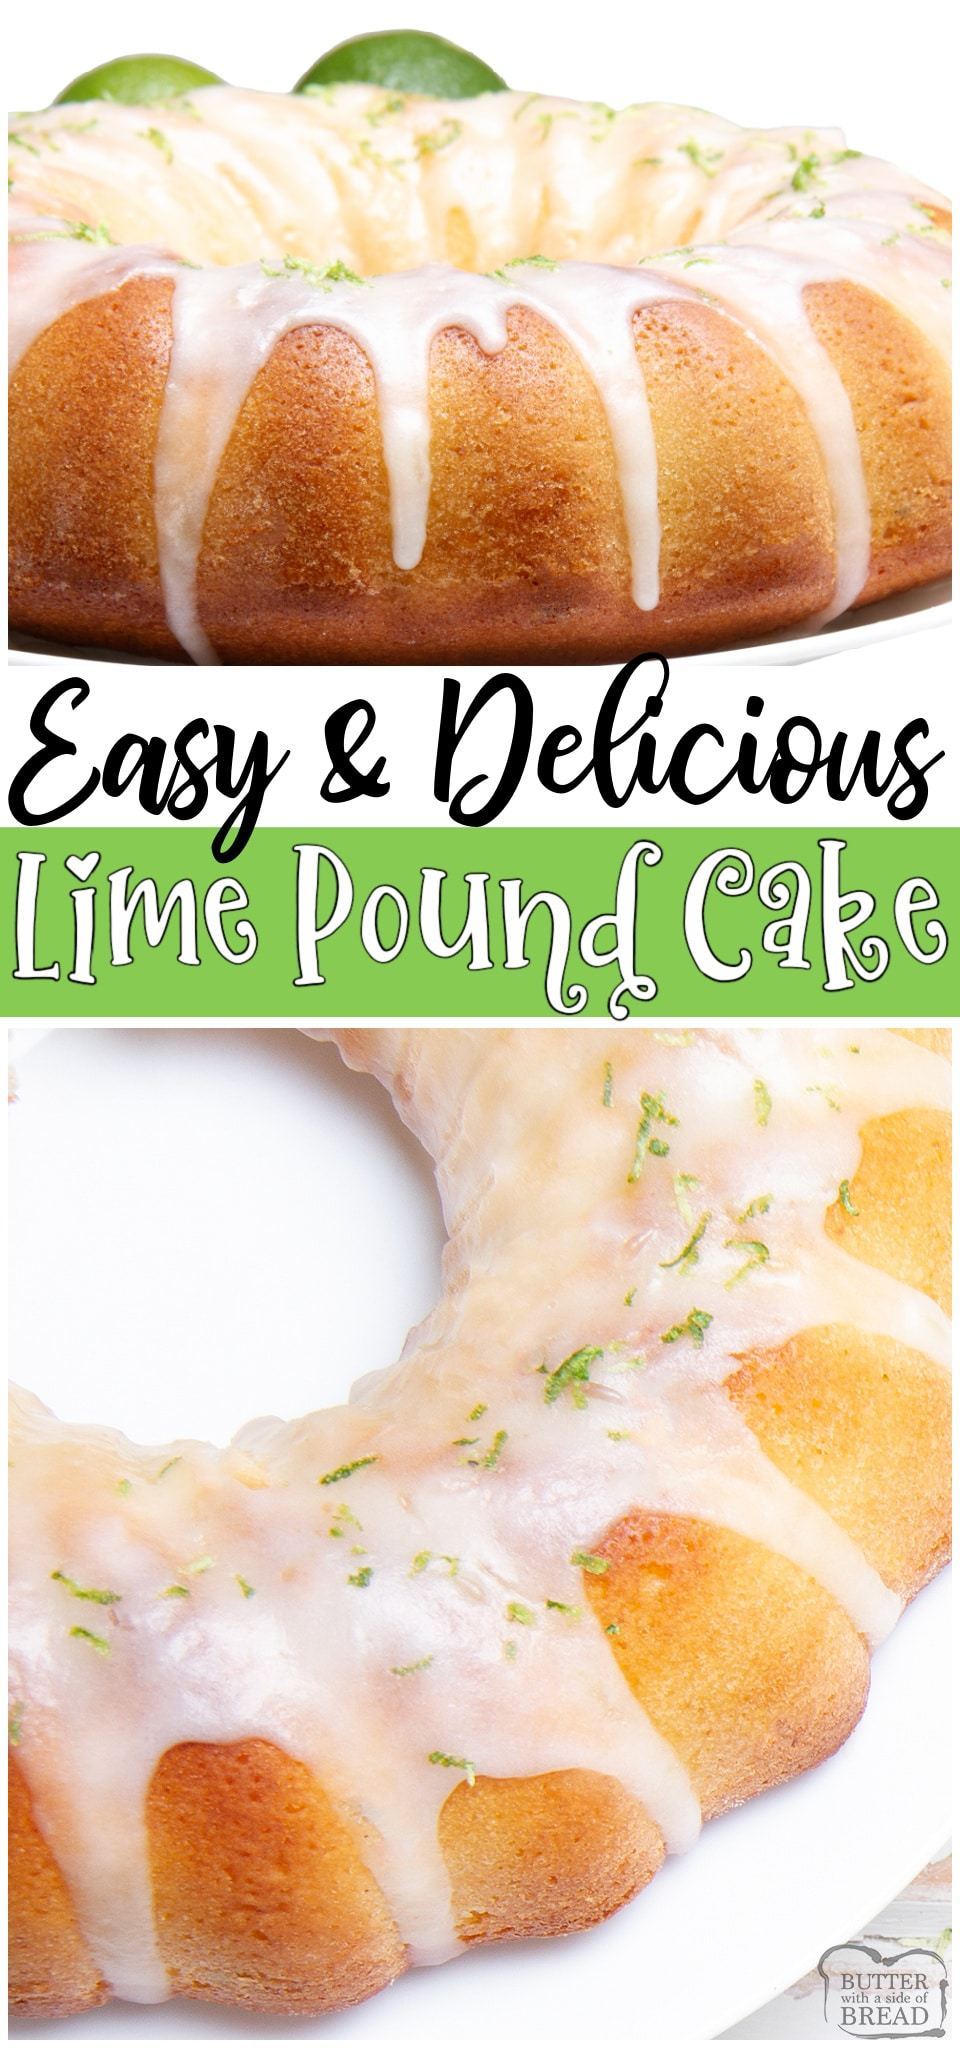 Buttery Lime Pound Cake recipe made with classic ingredients for a sweet & tangy lime dessert. Delicious pound cake with a bright, fresh lime flavor that everyone enjoys!